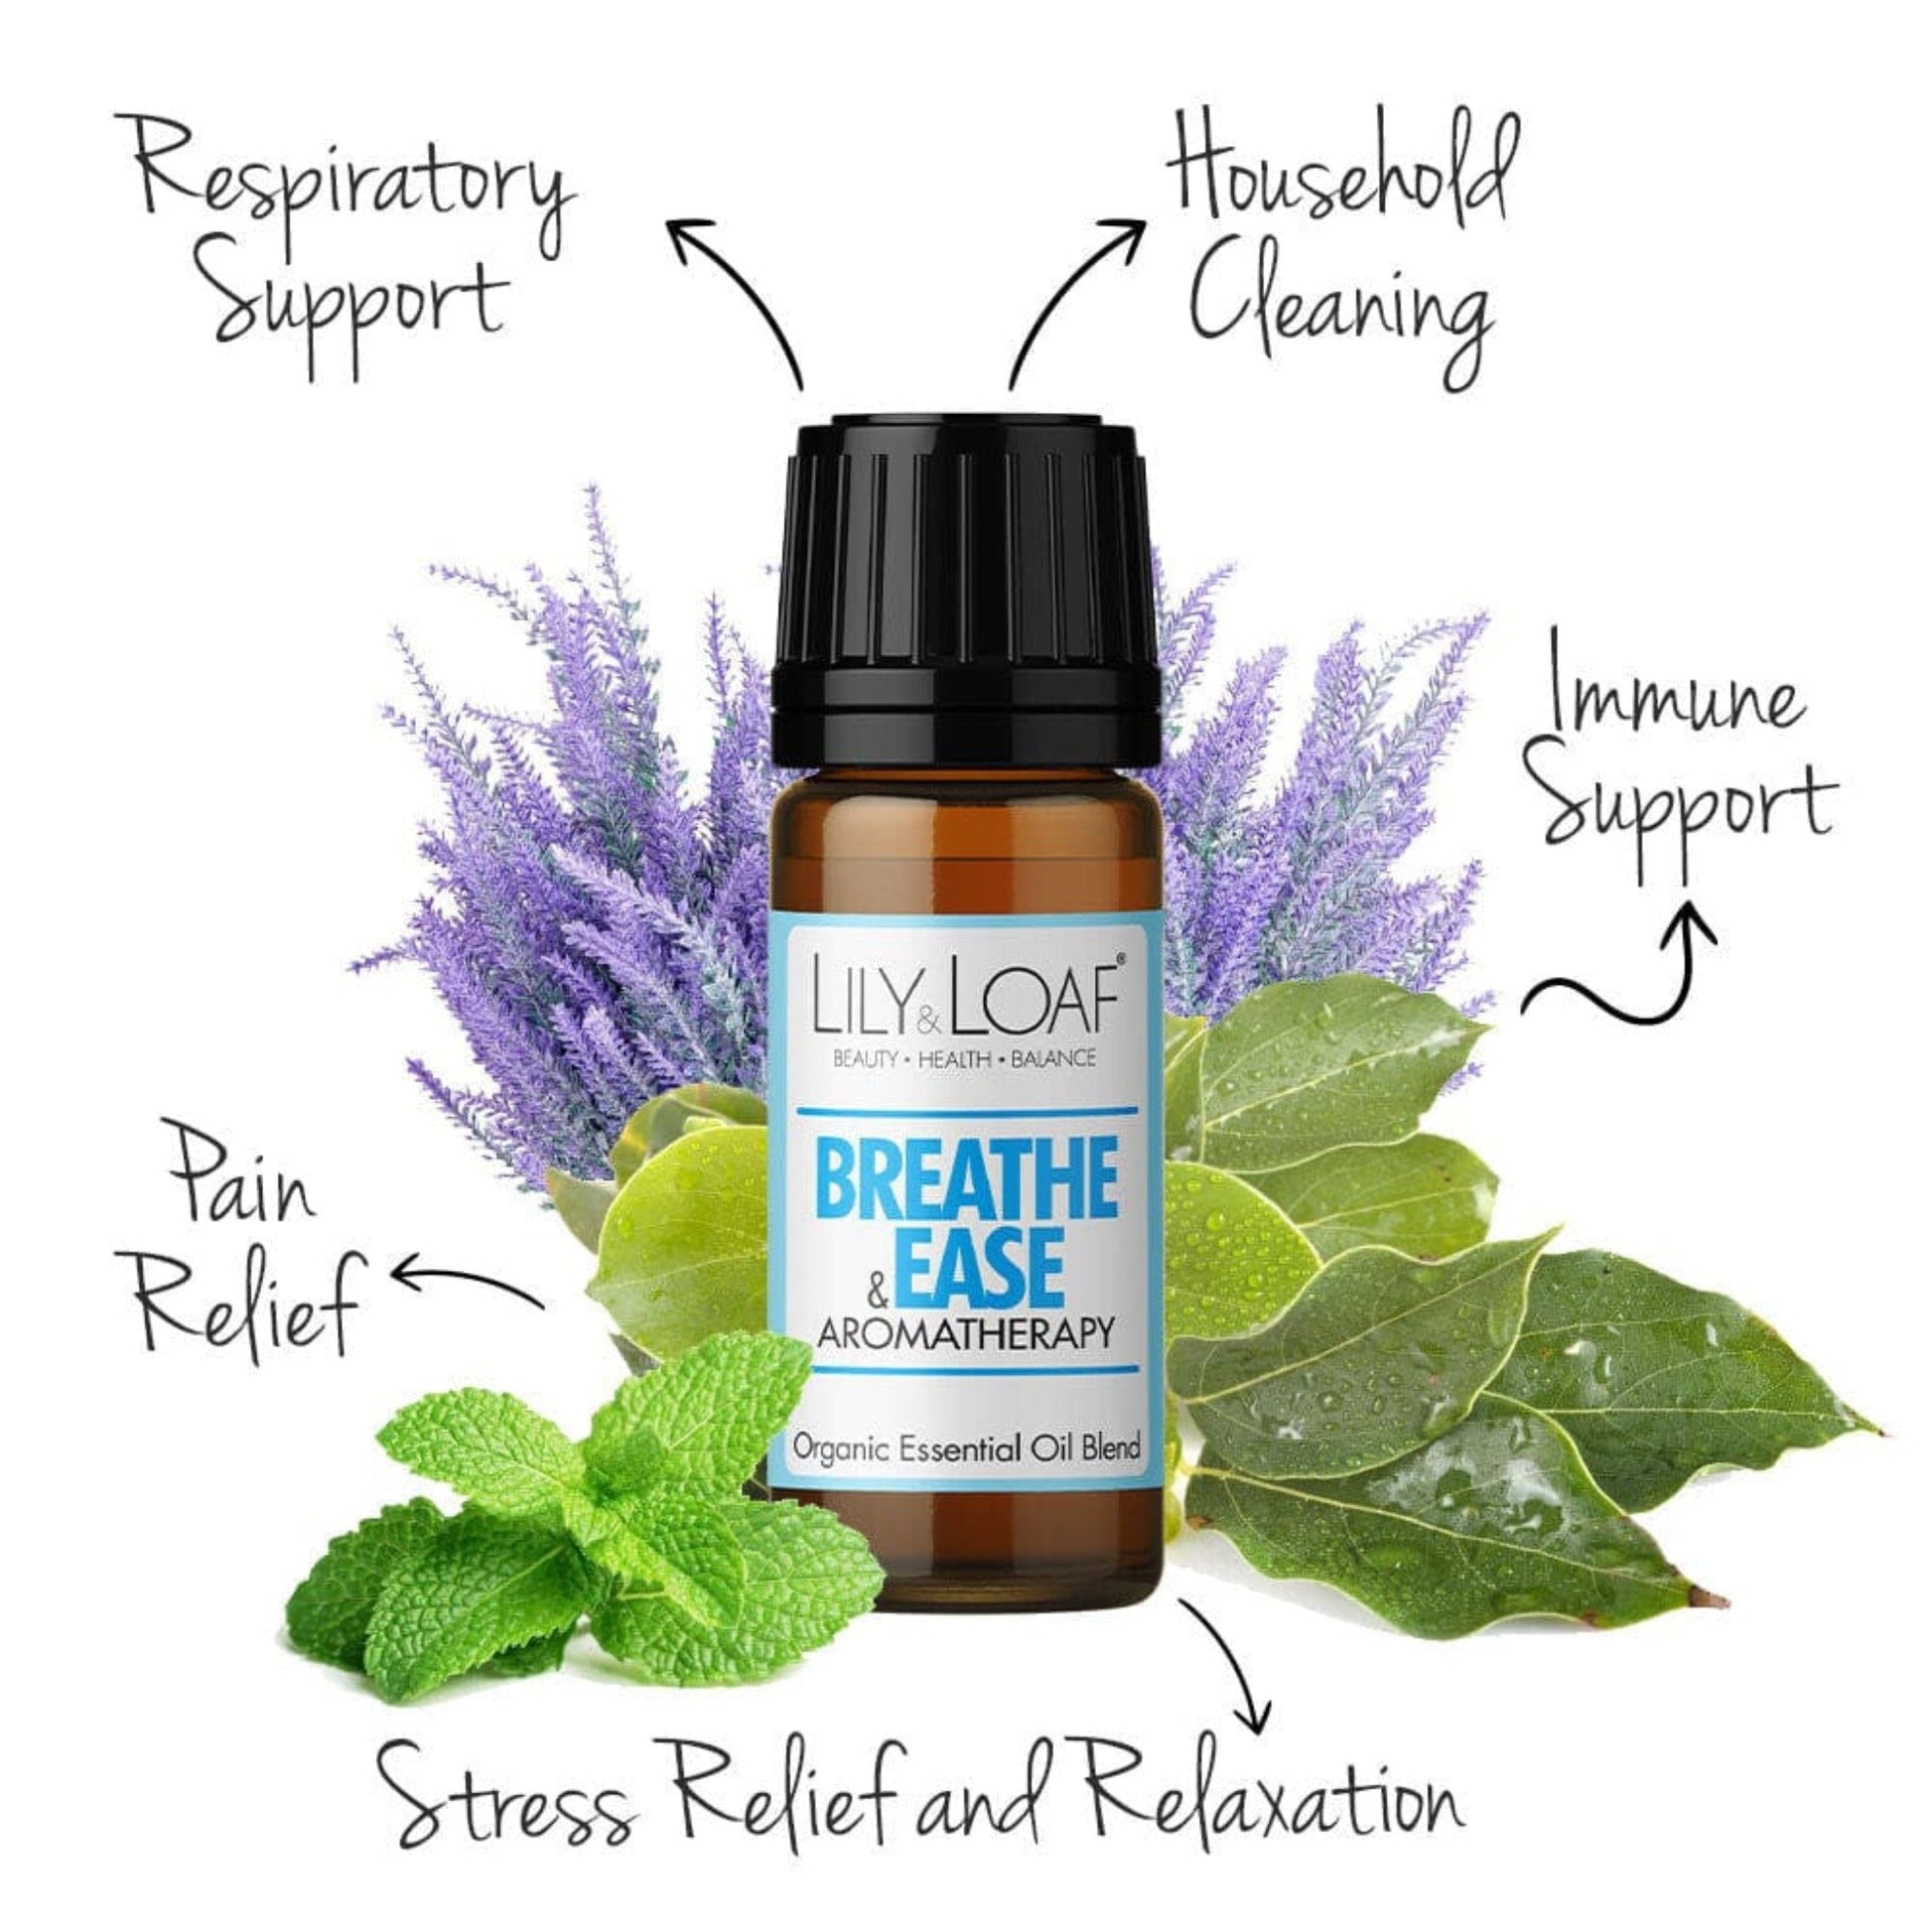 Lily & Loaf Breathe & Ease Aromatherapy Blend offer respiratory support, pain relief and immune support